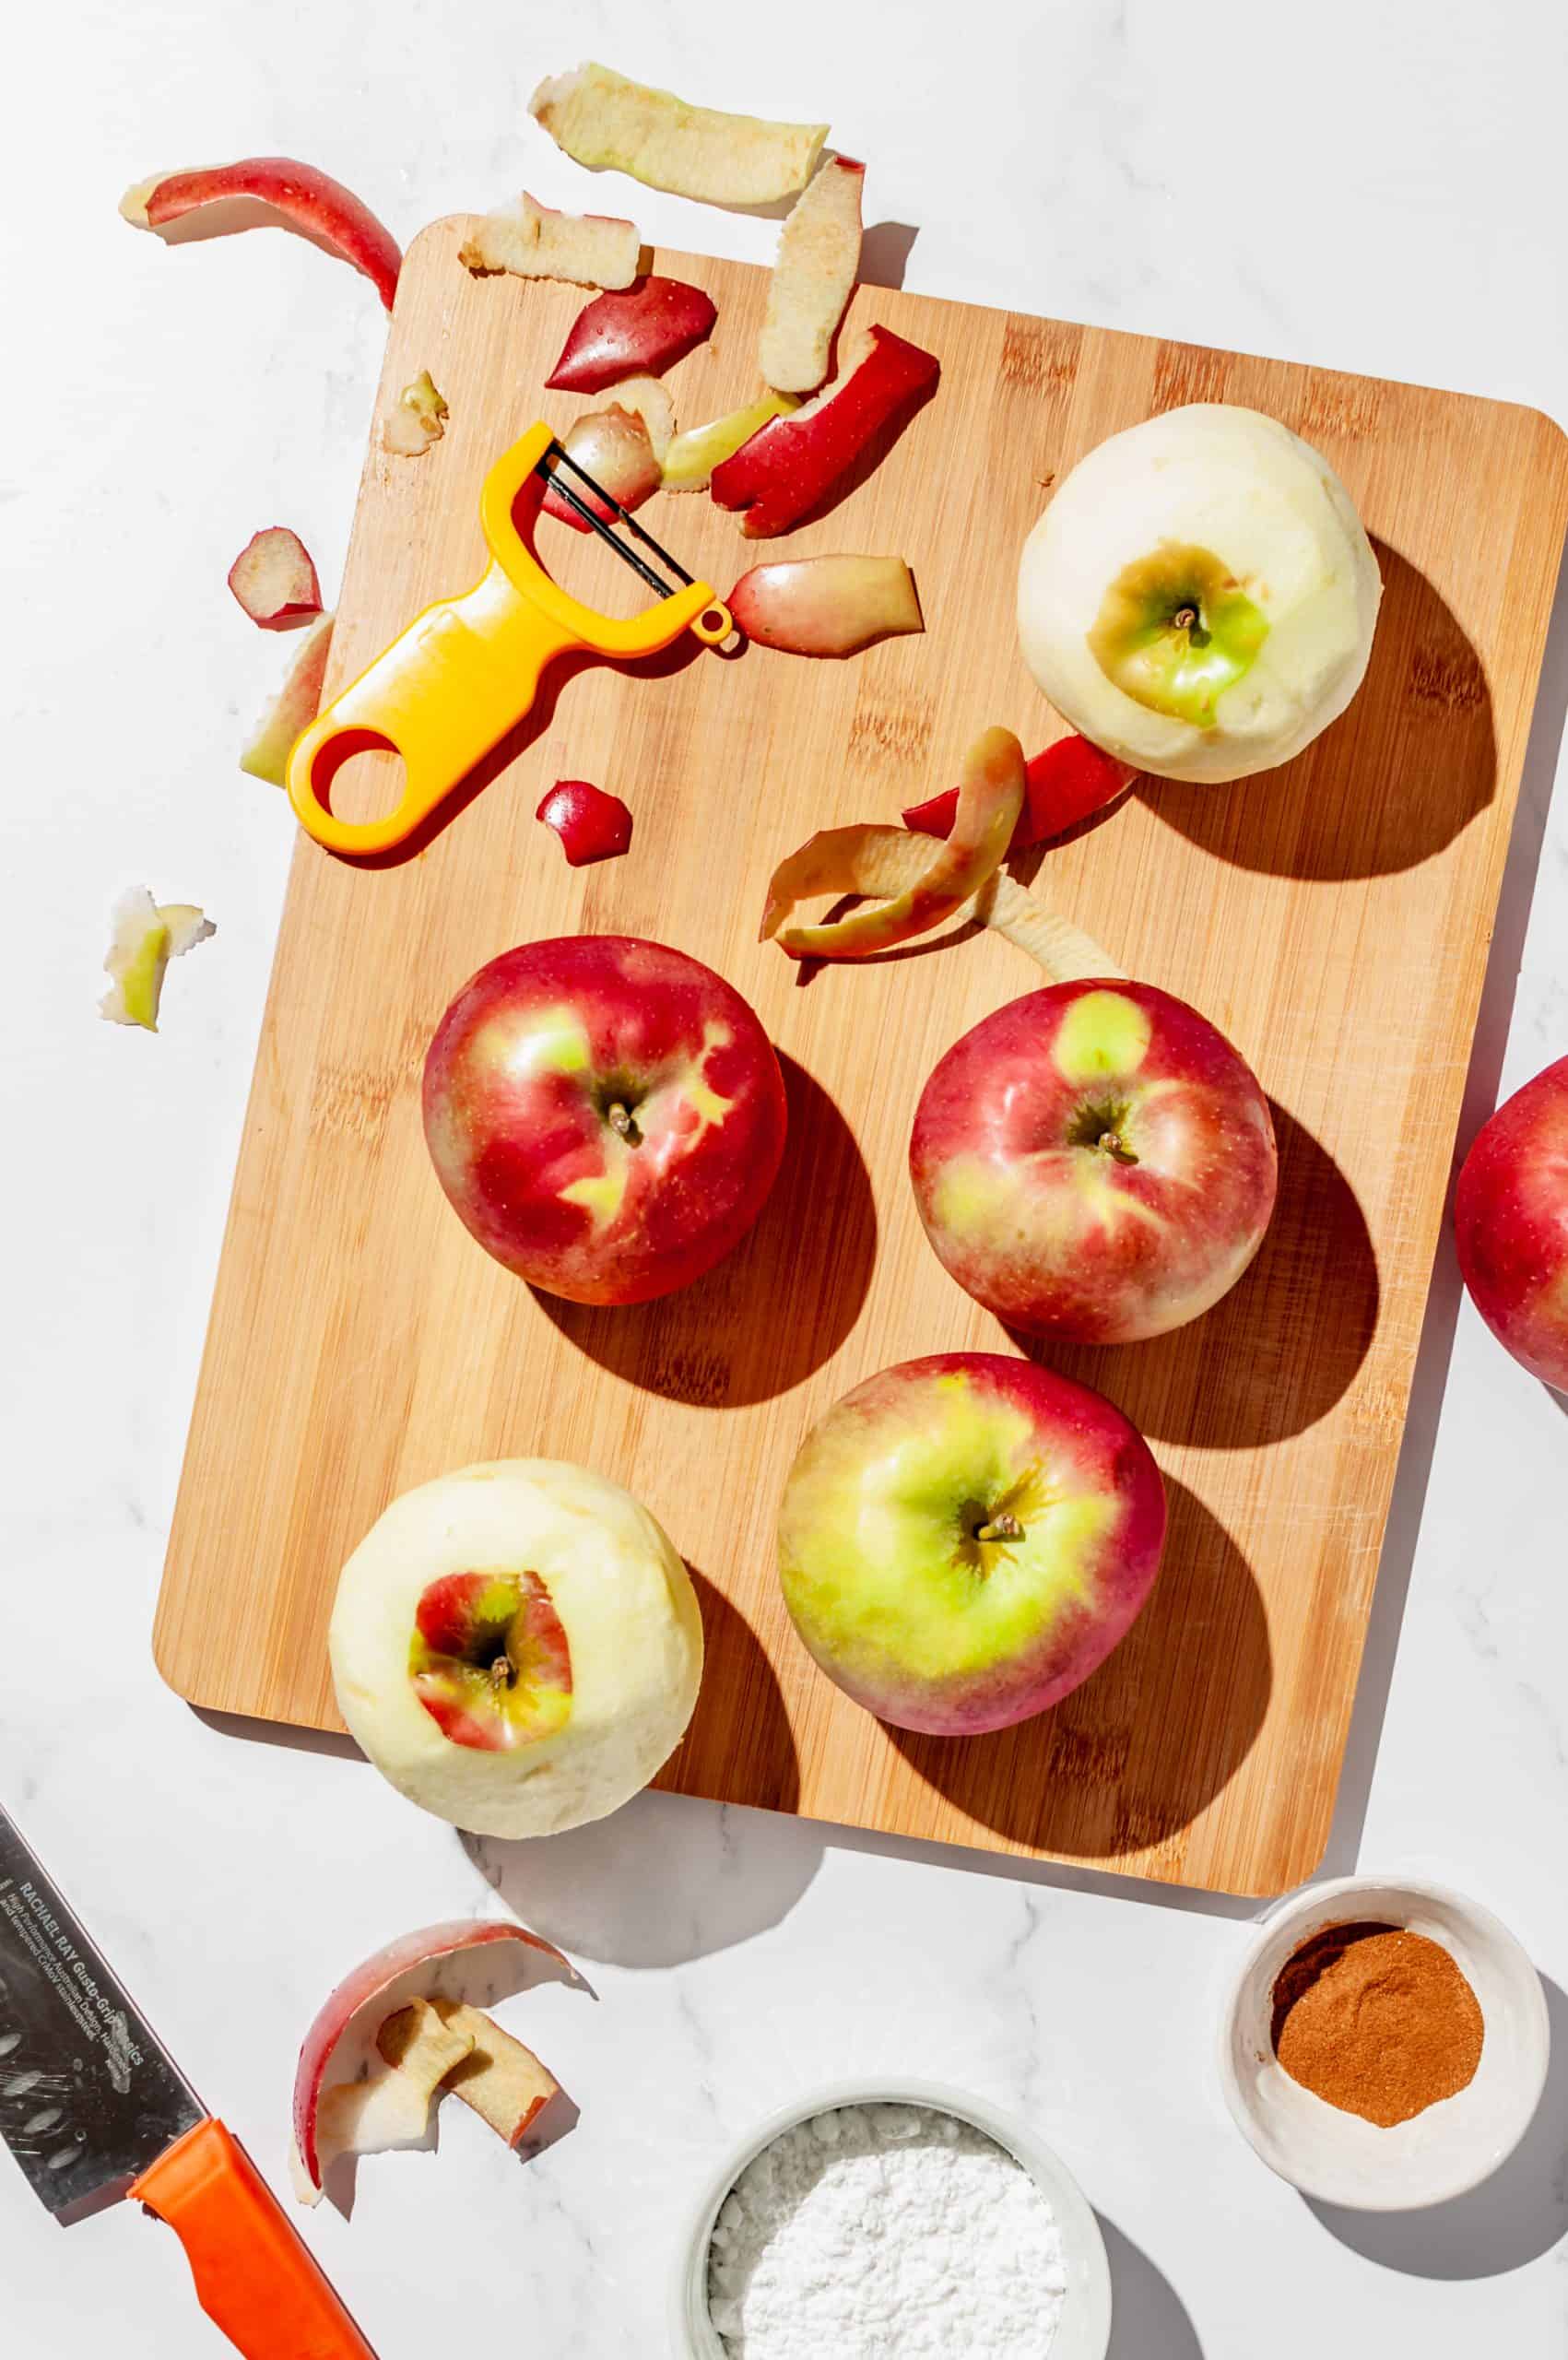 5 apples on cutting board, two peeled, with yellow peeler and scraps